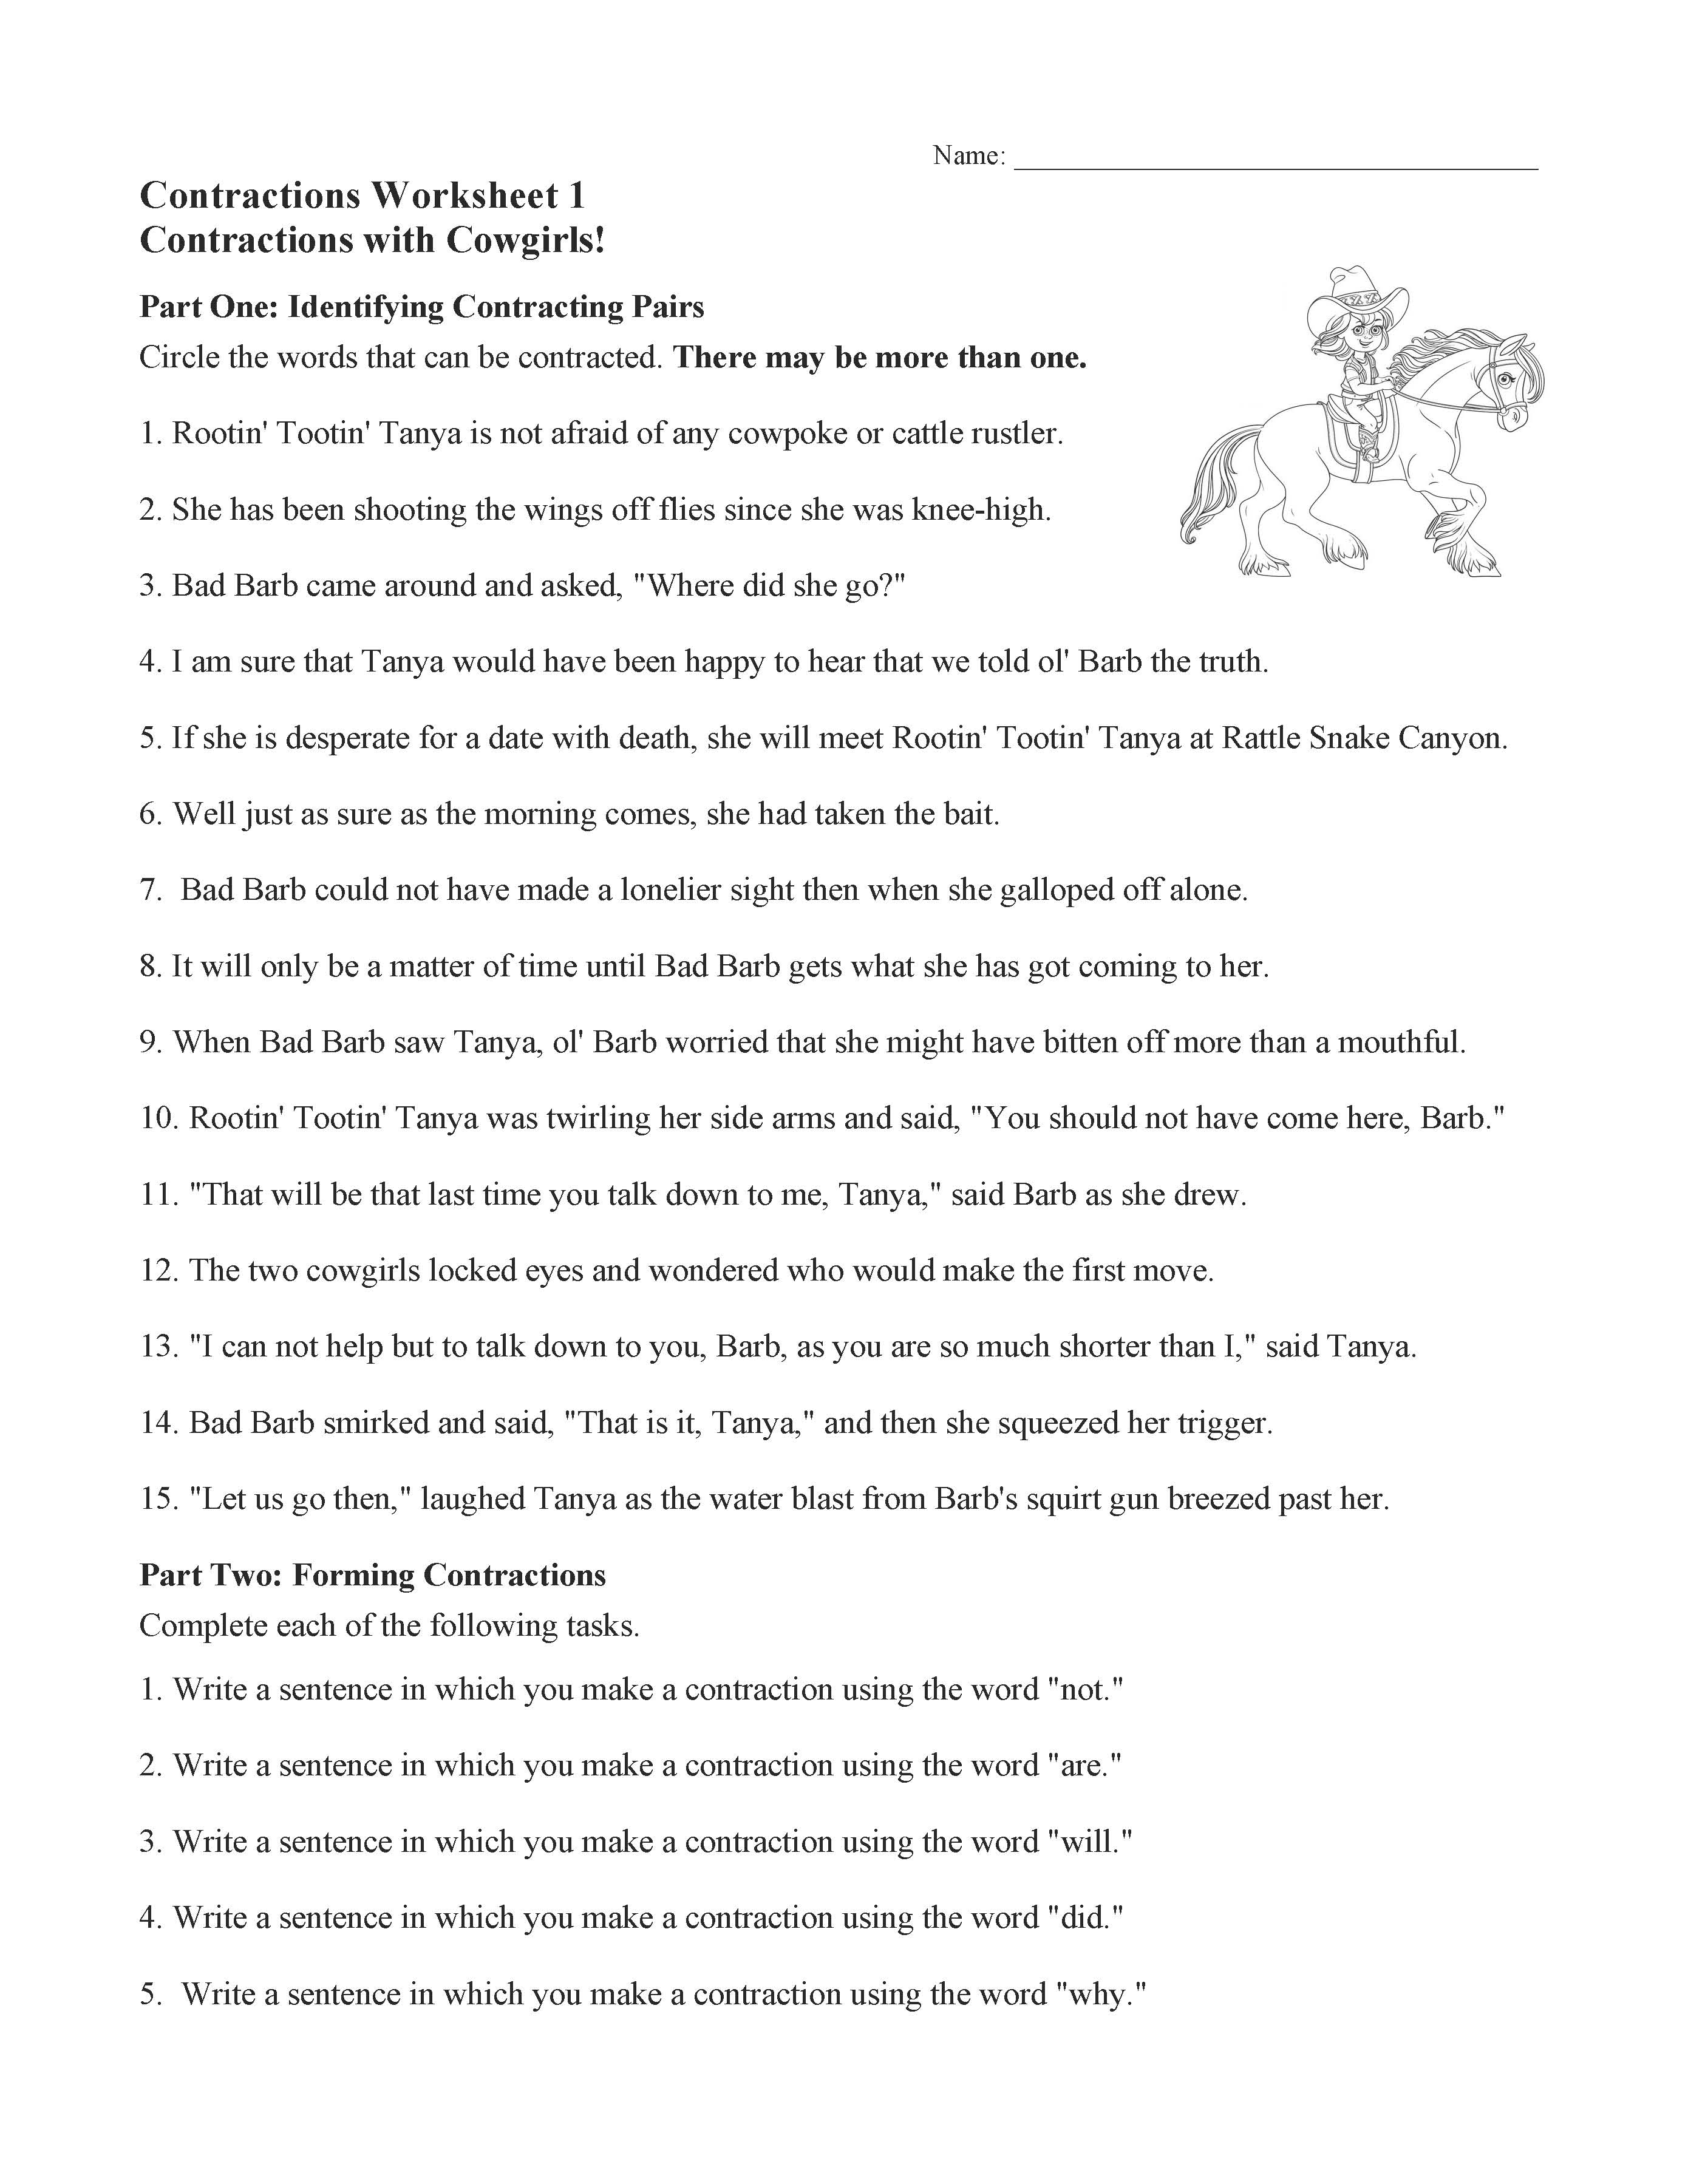 This is a preview image of Contractions Worksheet 1. Click on it to enlarge it or view the source file.